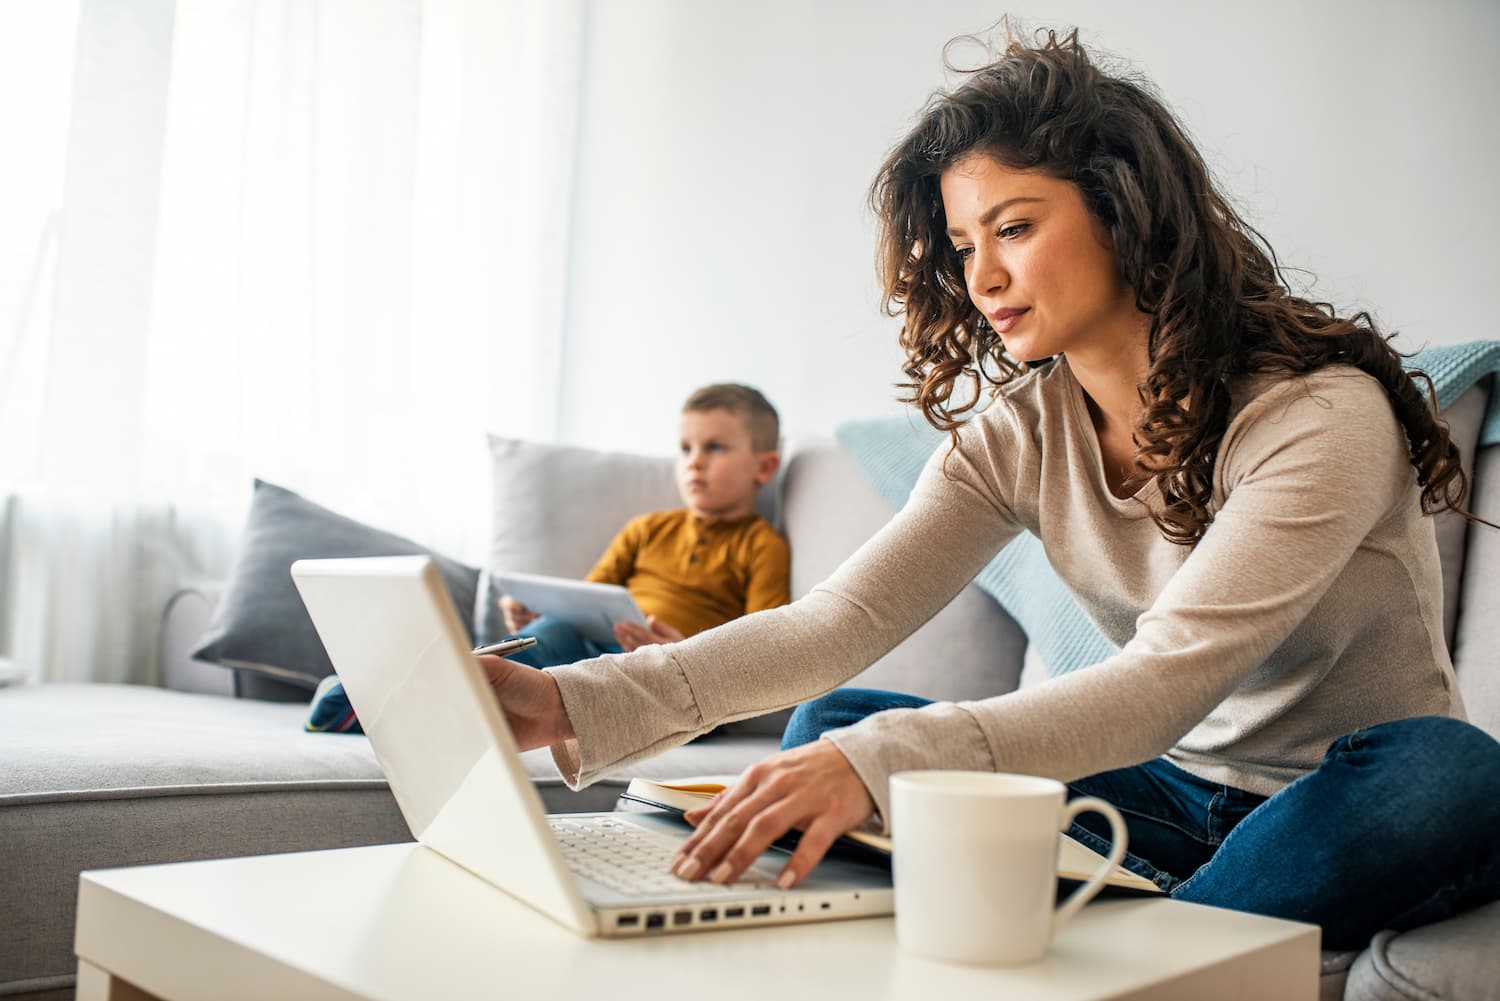 30+ Best Side Hustle Ideas for Moms: Stay at Home Mom Side Jobs to Consider